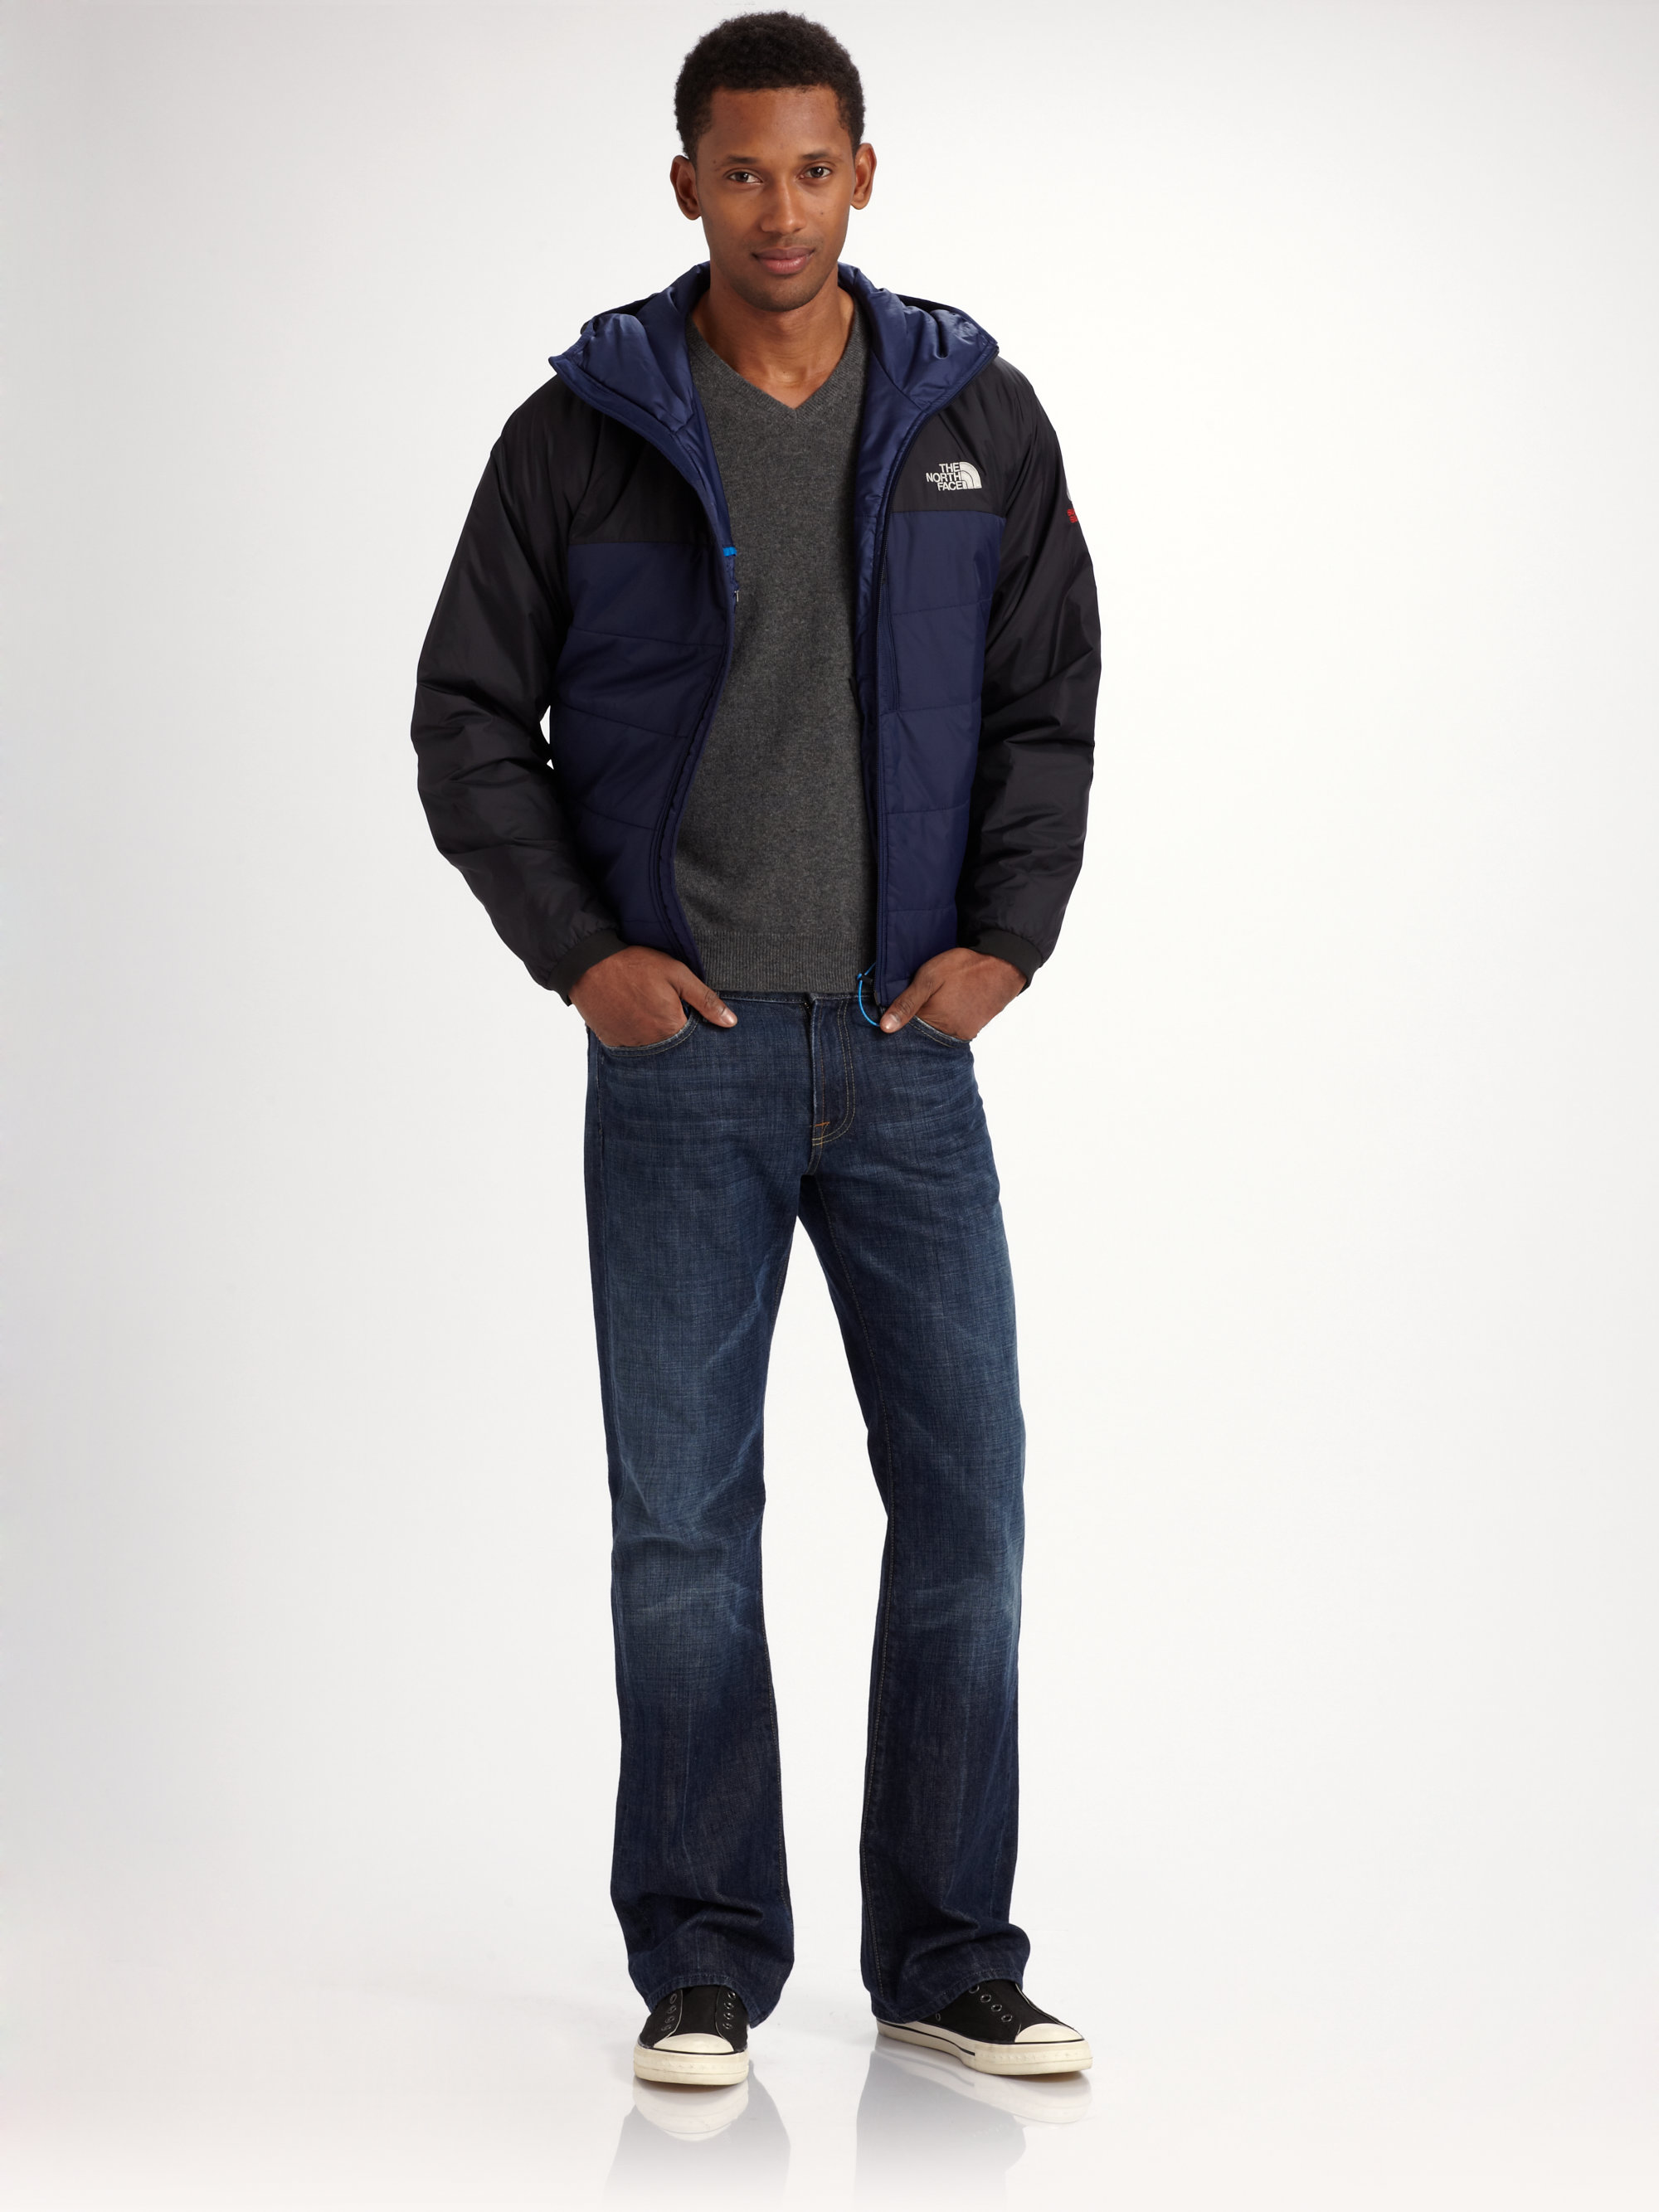 The North Face Redpoint Optimus Hooded Jacket in Blue for Men - Lyst